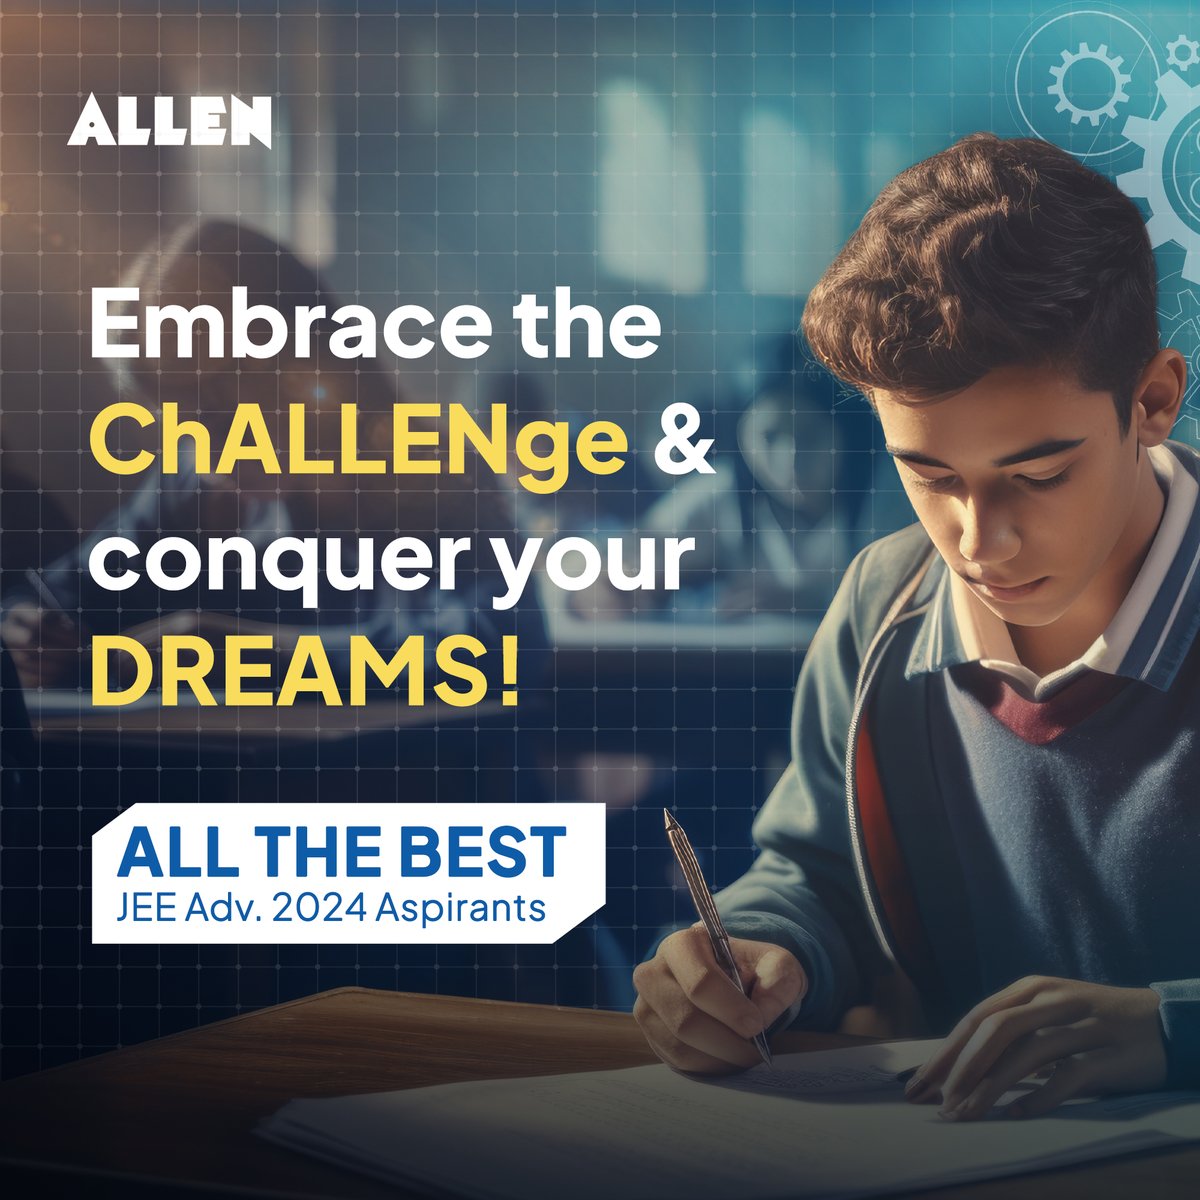 🌟 Best of Luck to all the JEE Advanced 2024 Aspirants. 🔔 LIVE video solutions, paper analysis, rank predictor, and answer keys will be available at: allen.in #ALLEN #BestOfLuck #JEEAdvanced2024 #JEEAspirants #LivePaperSolutions